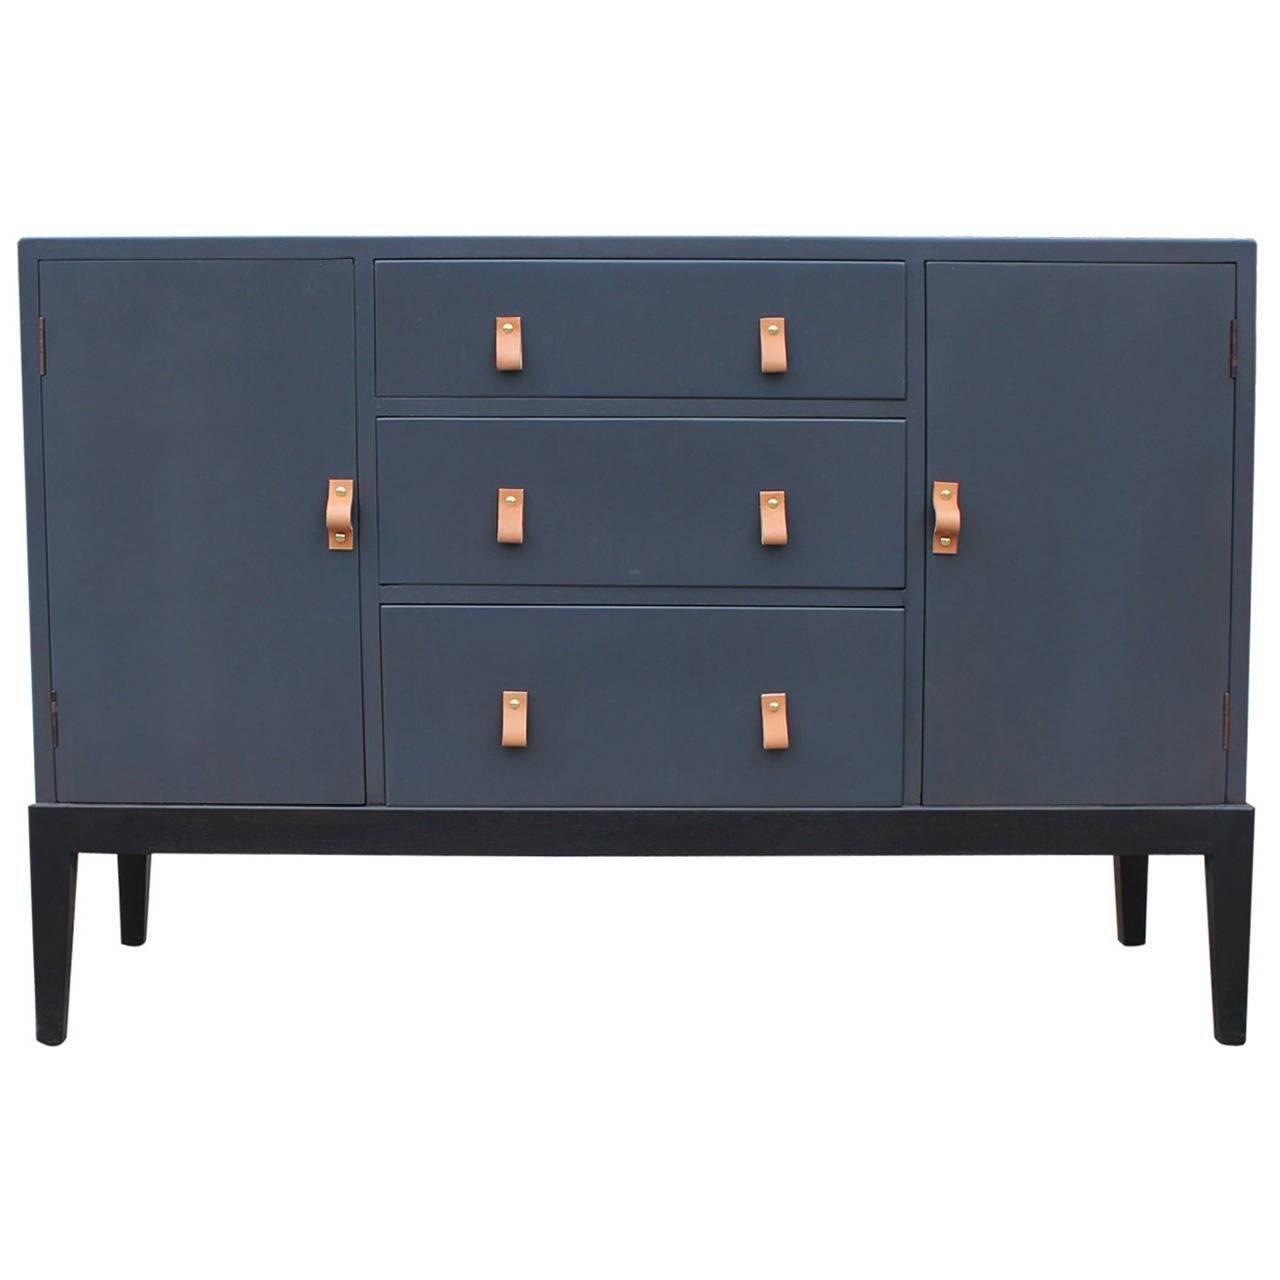 Superb Grey Sideboard Or Buffet With Leather Handles At 1stdibs Intended For Grey Sideboards (Photo 3 of 15)